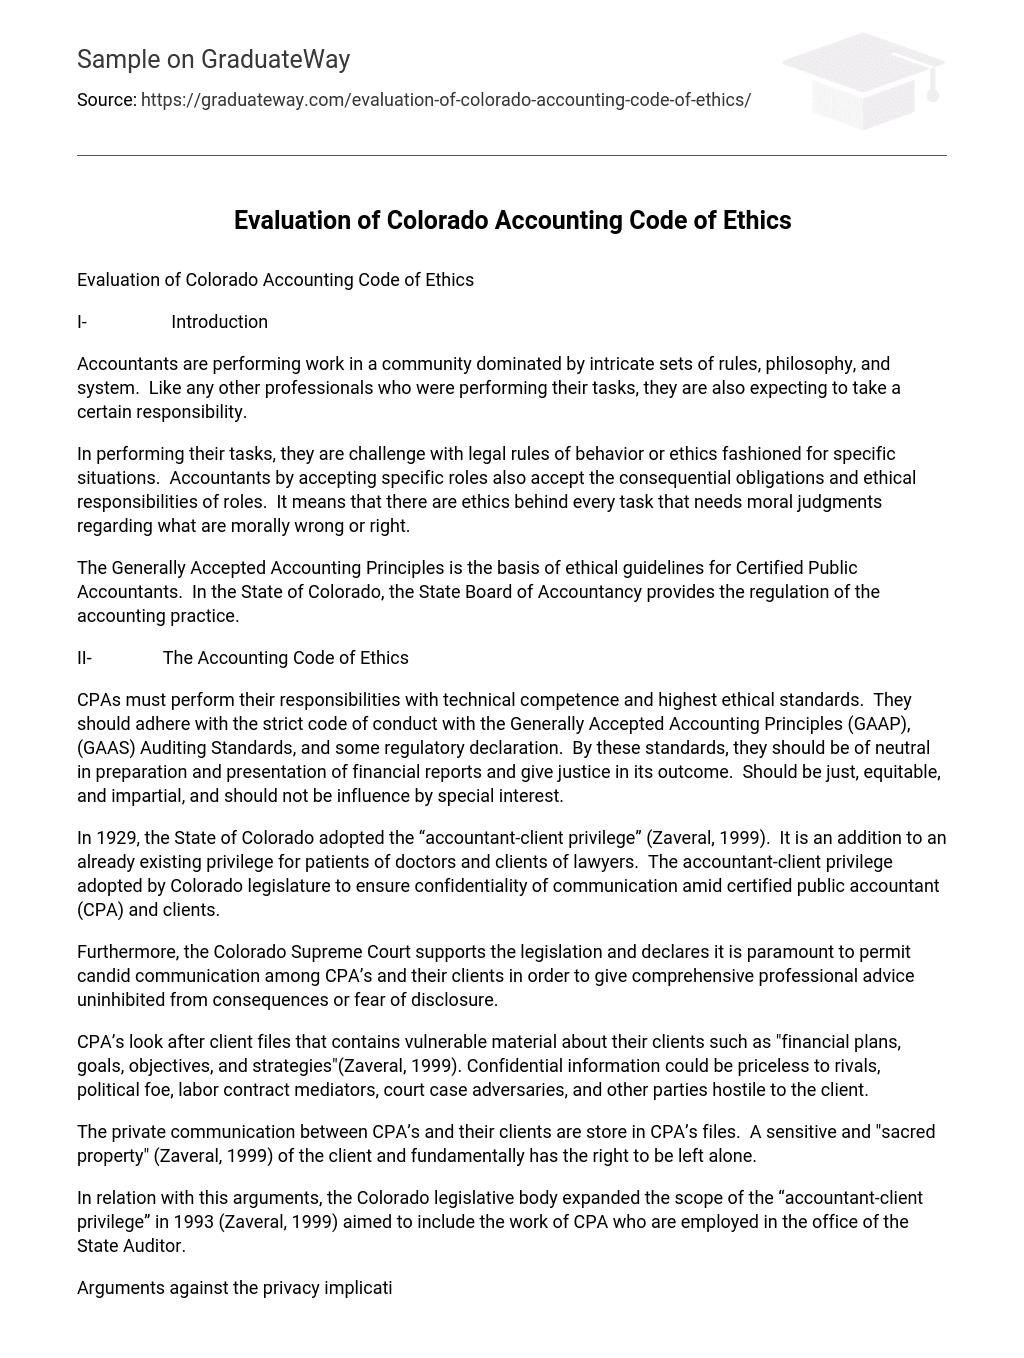 Evaluation of Colorado Accounting Code of Ethics